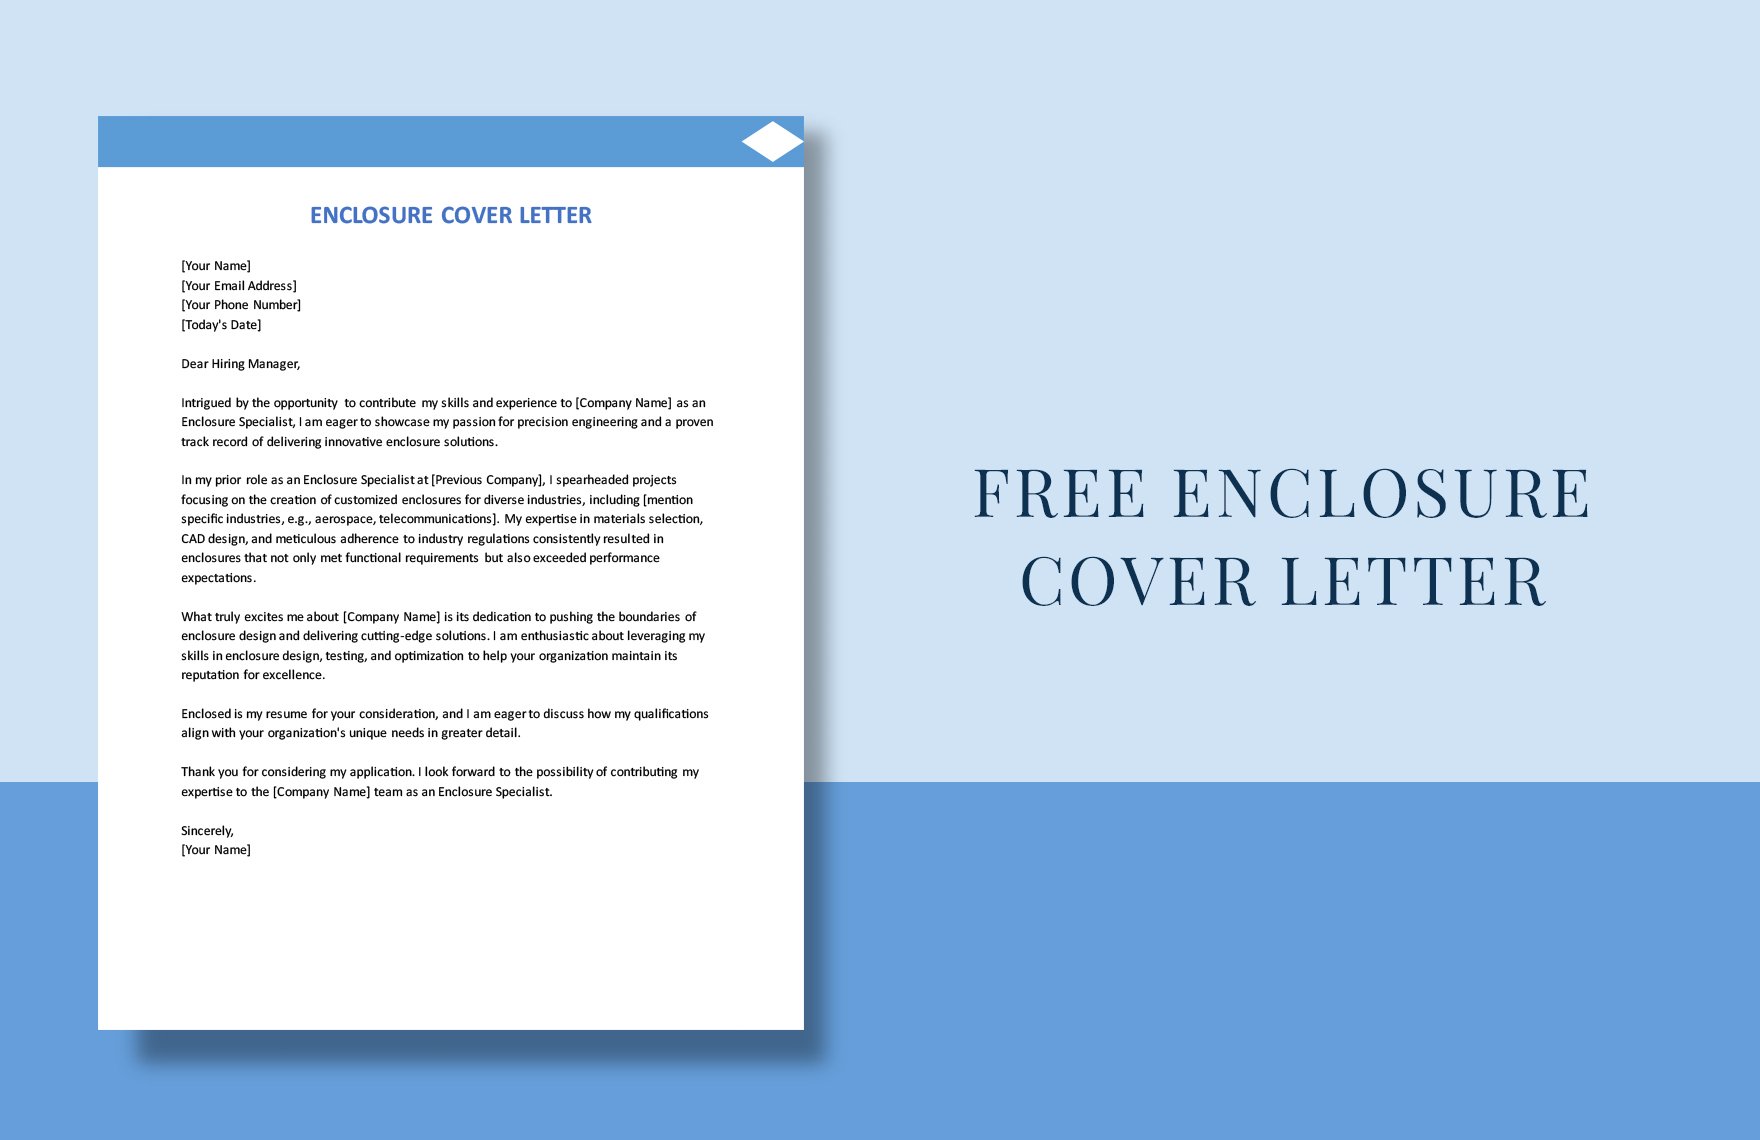 what is the enclosure on a cover letter